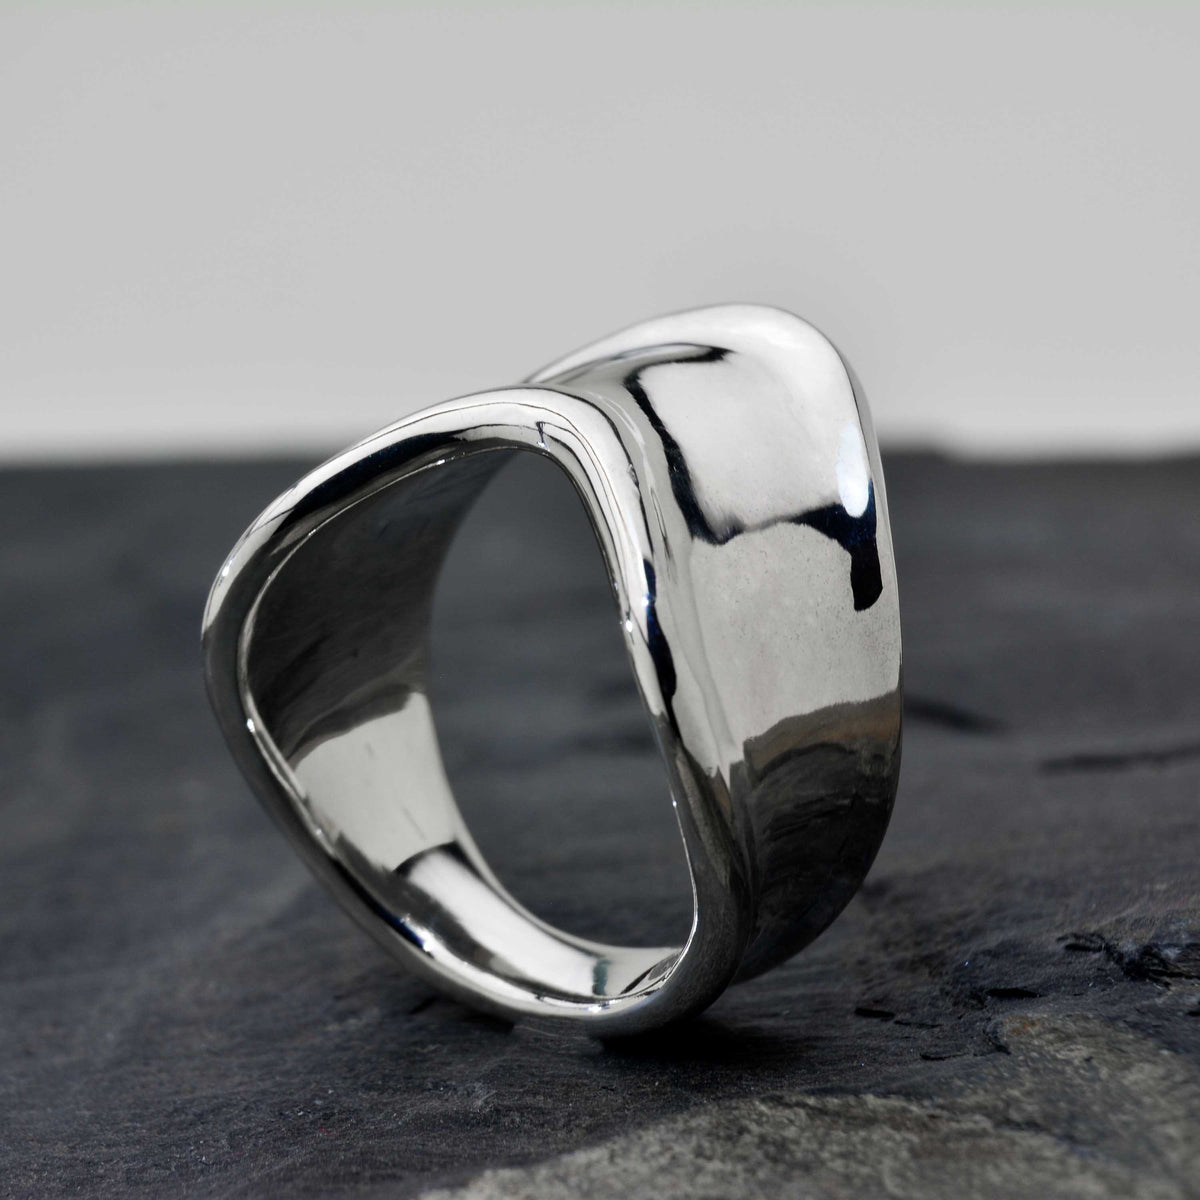 Evolution Ring Bold Beauty: A Thick and Artistic Ring with a Stunning Design